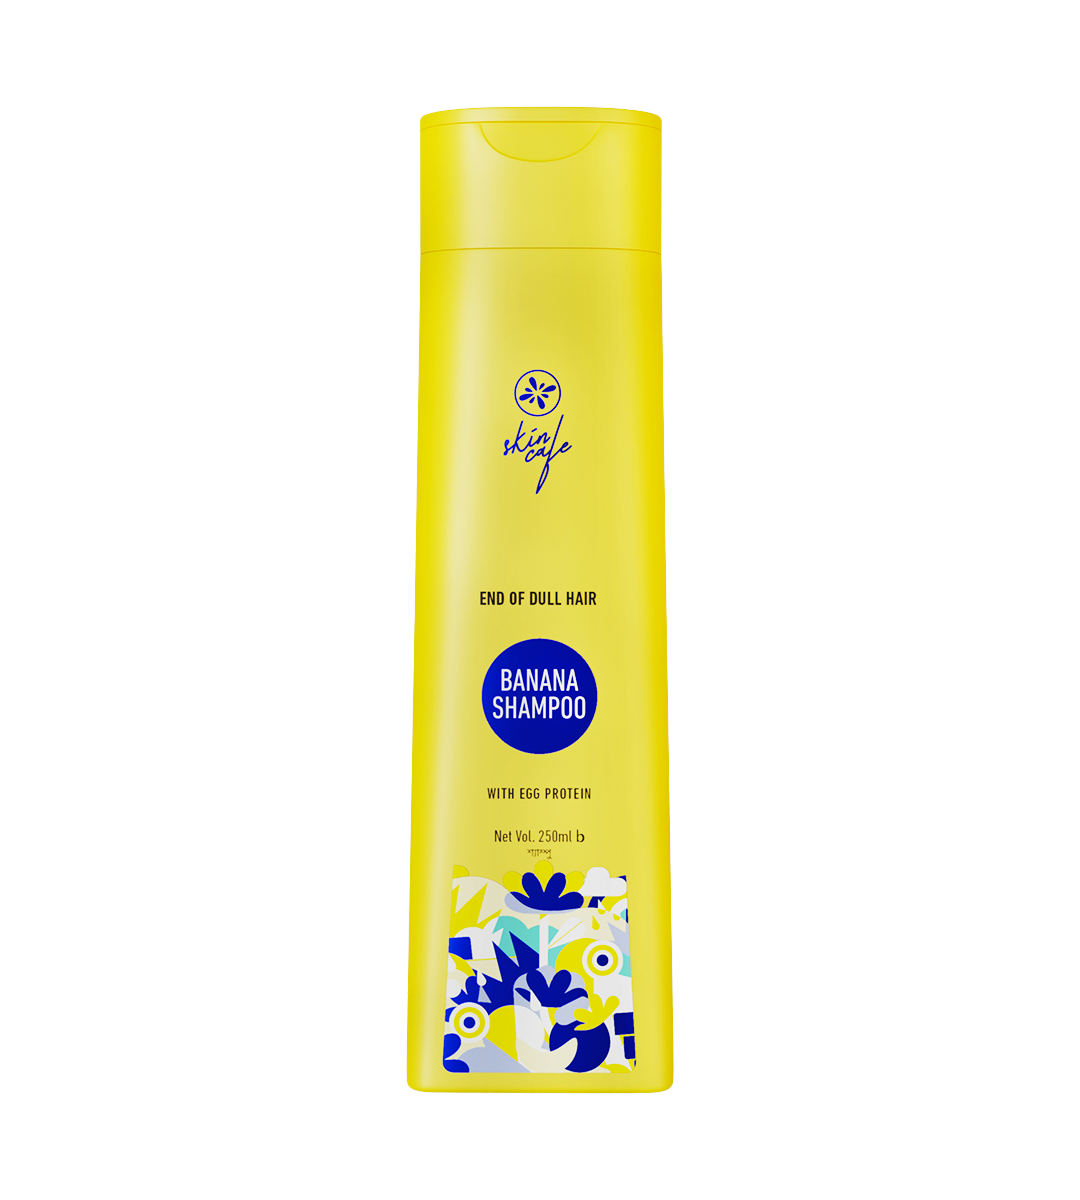 Skin Cafe End of Dull Hair Banana Shampoo with Egg Protein